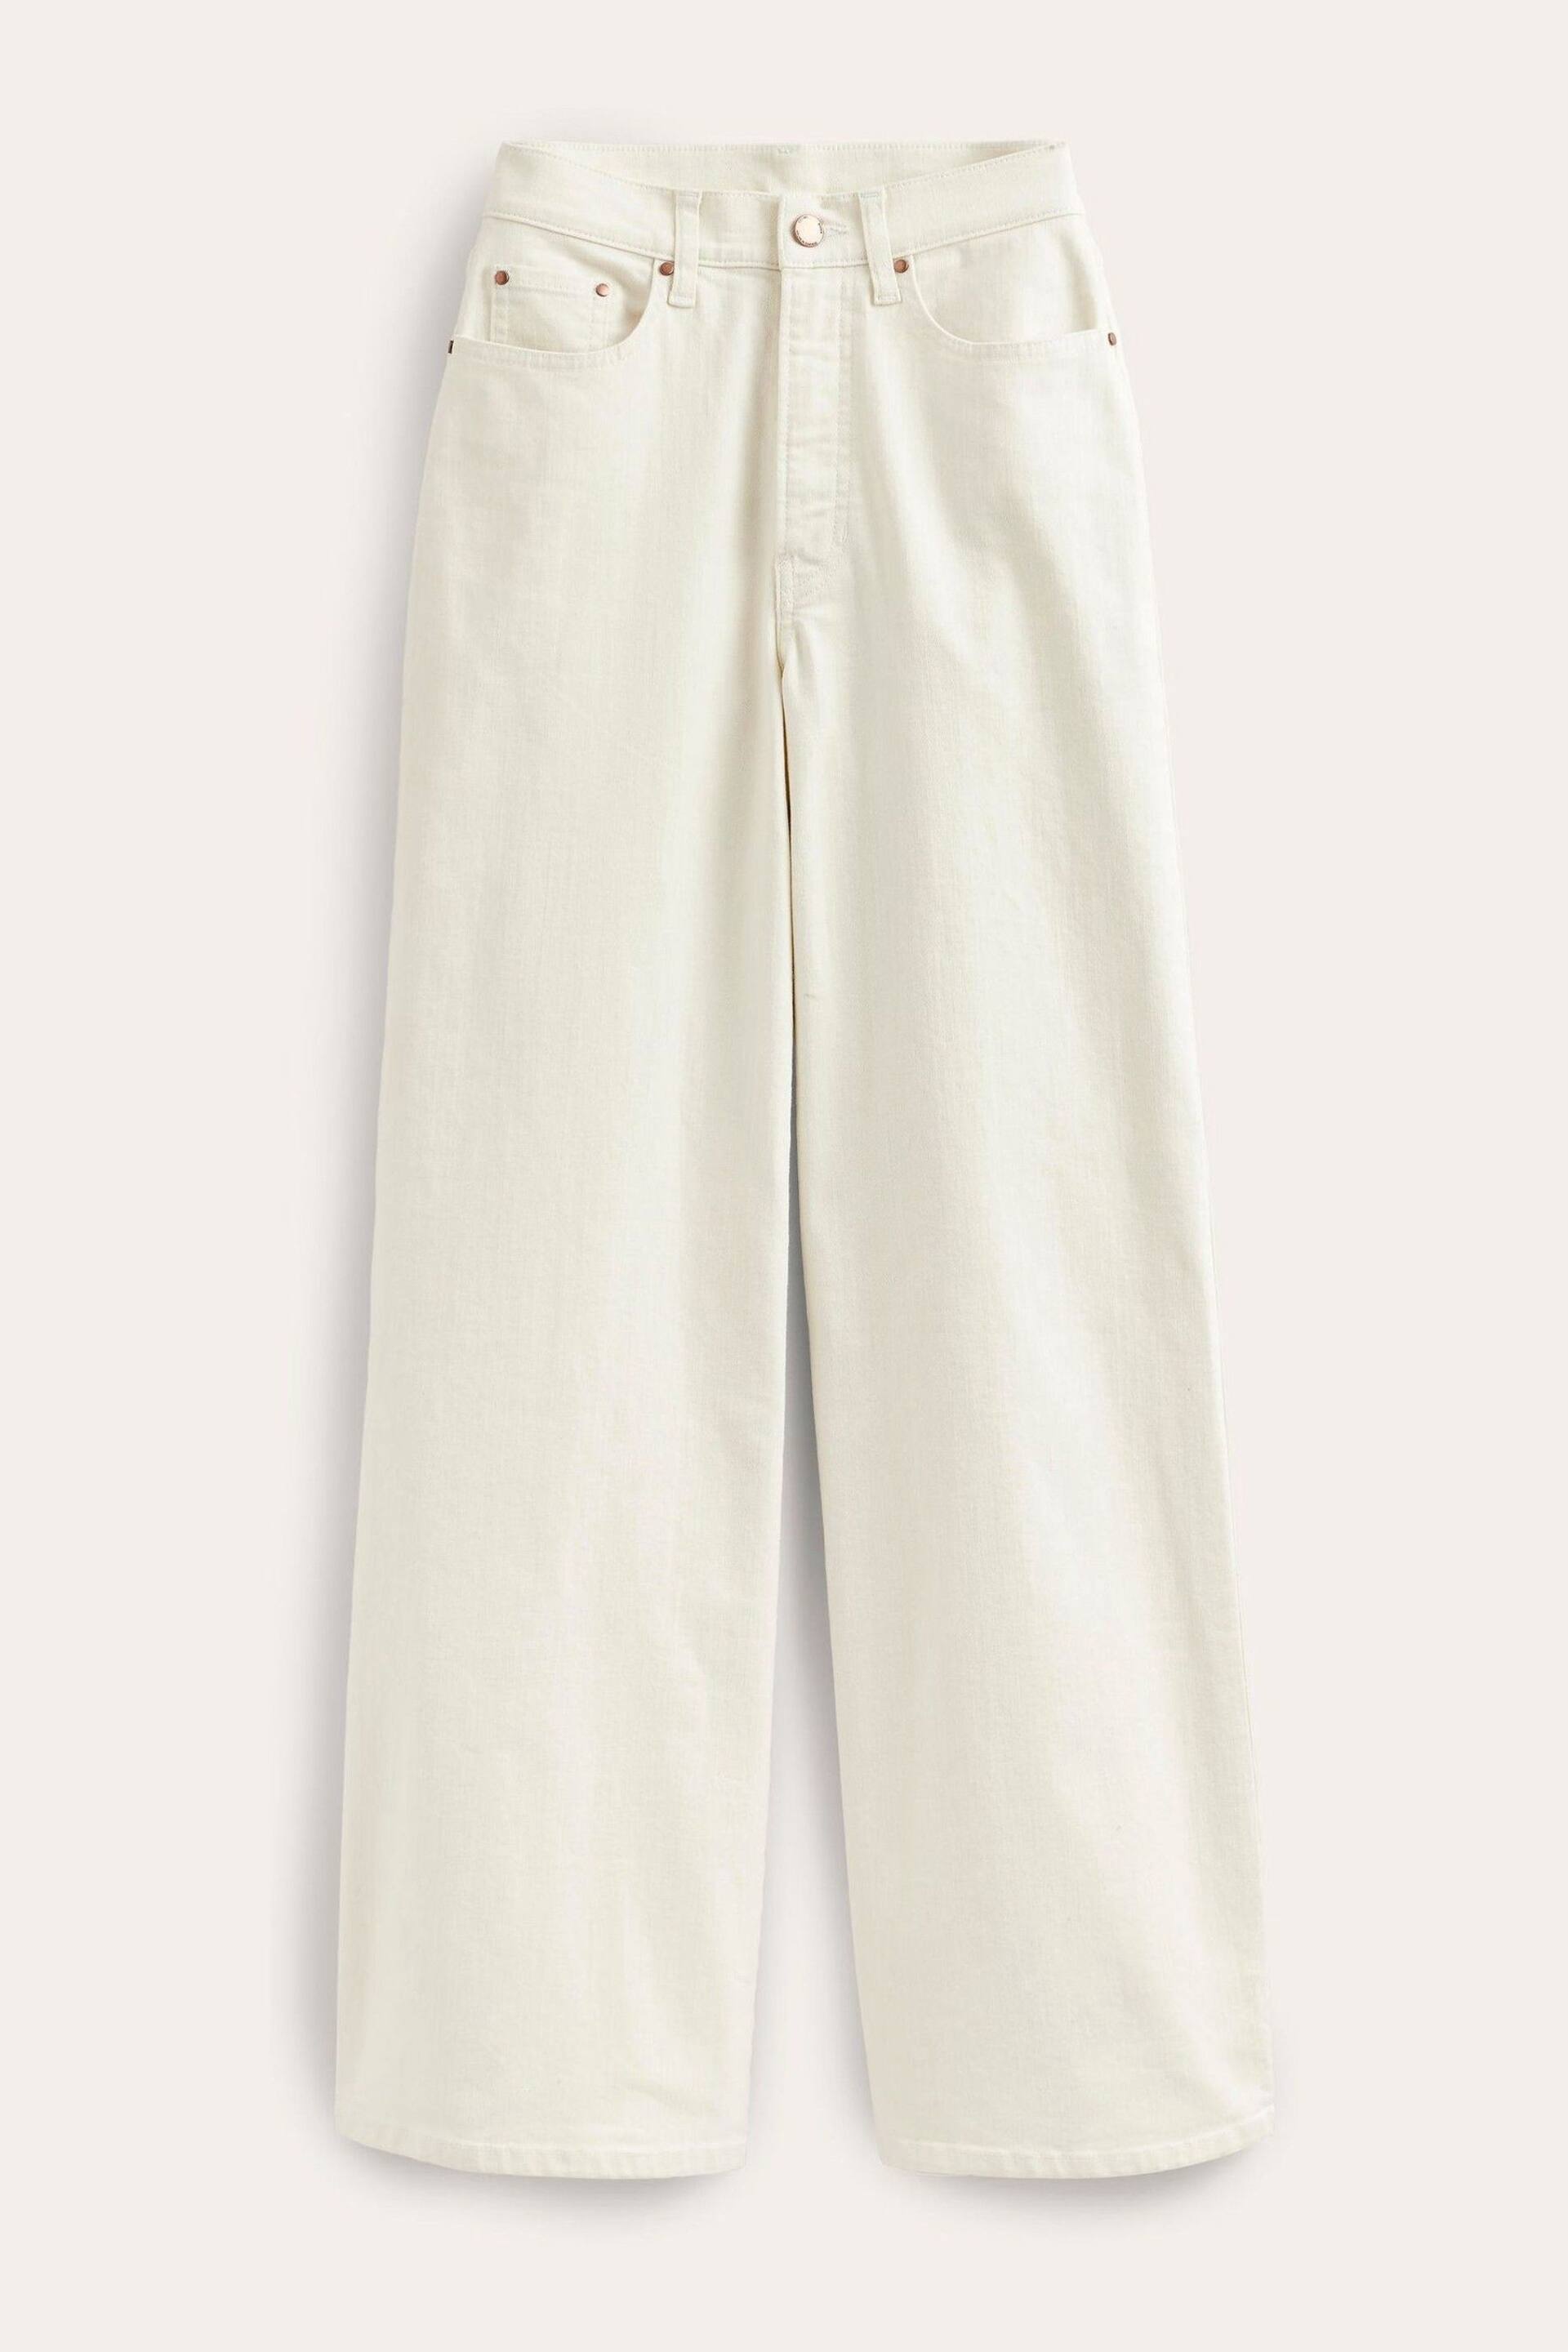 Boden White High Rise Wide Leg Jeans - Image 8 of 8